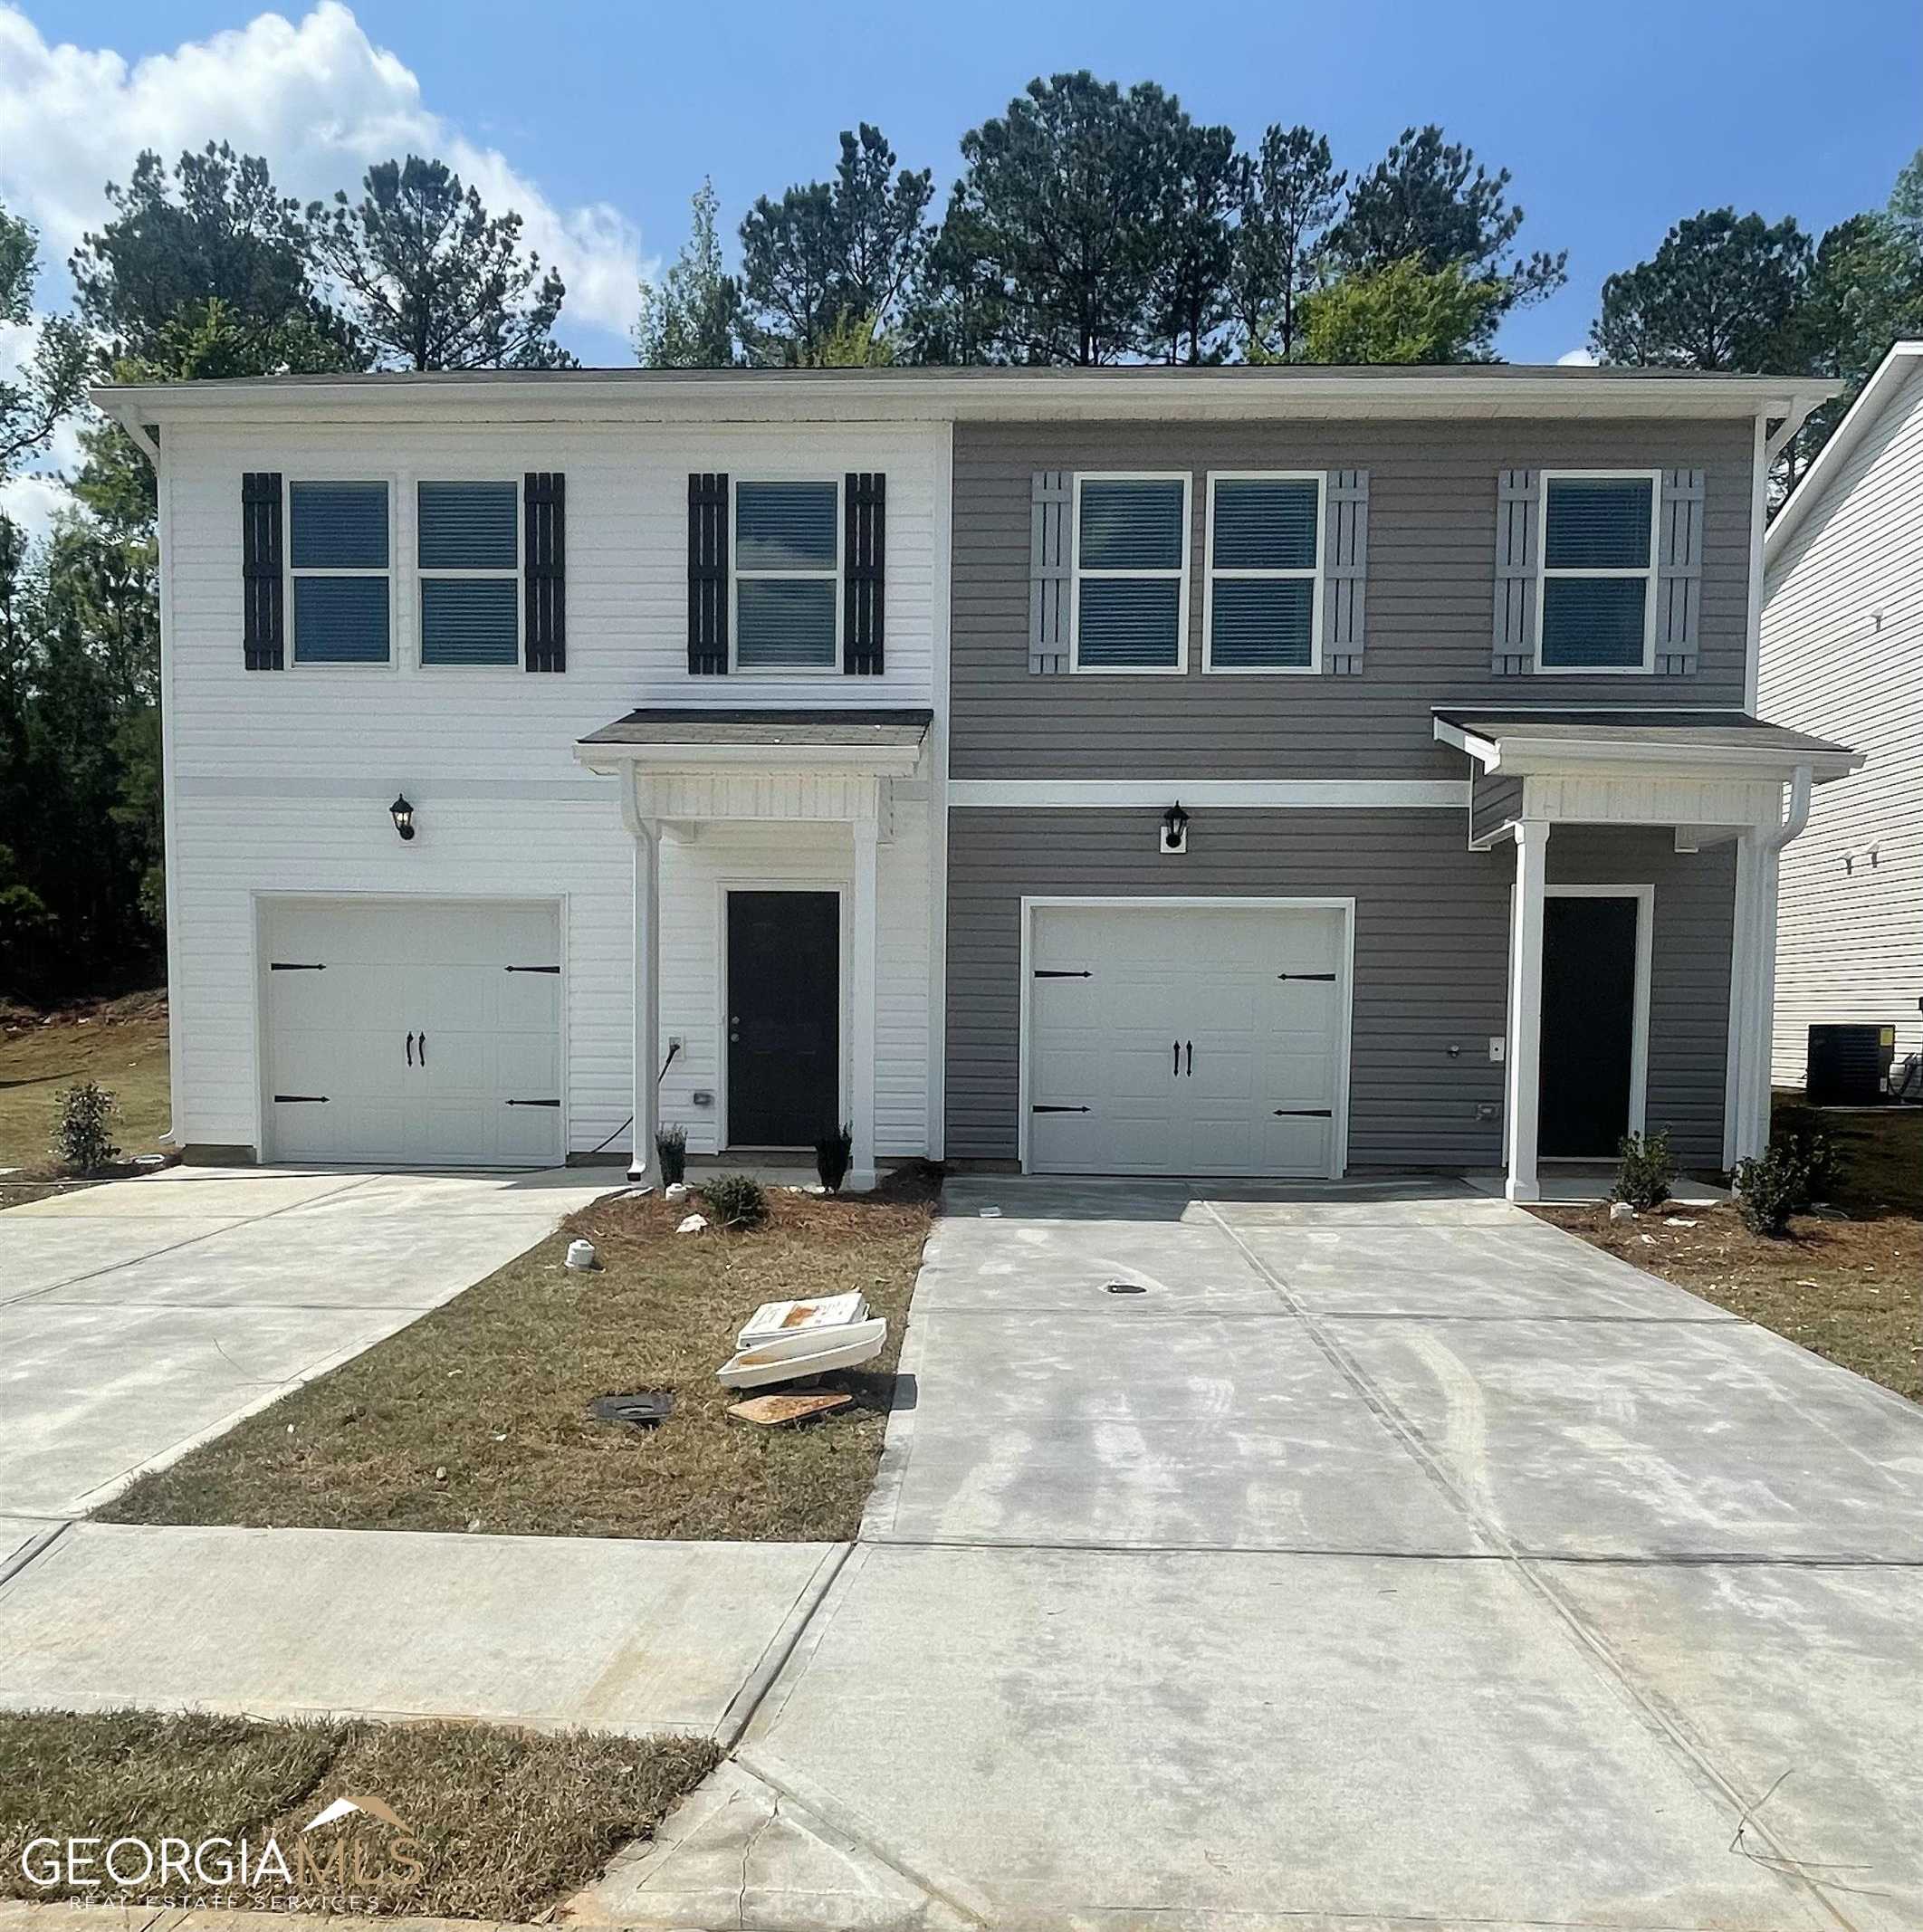 View Milledgeville, GA 31061 townhome